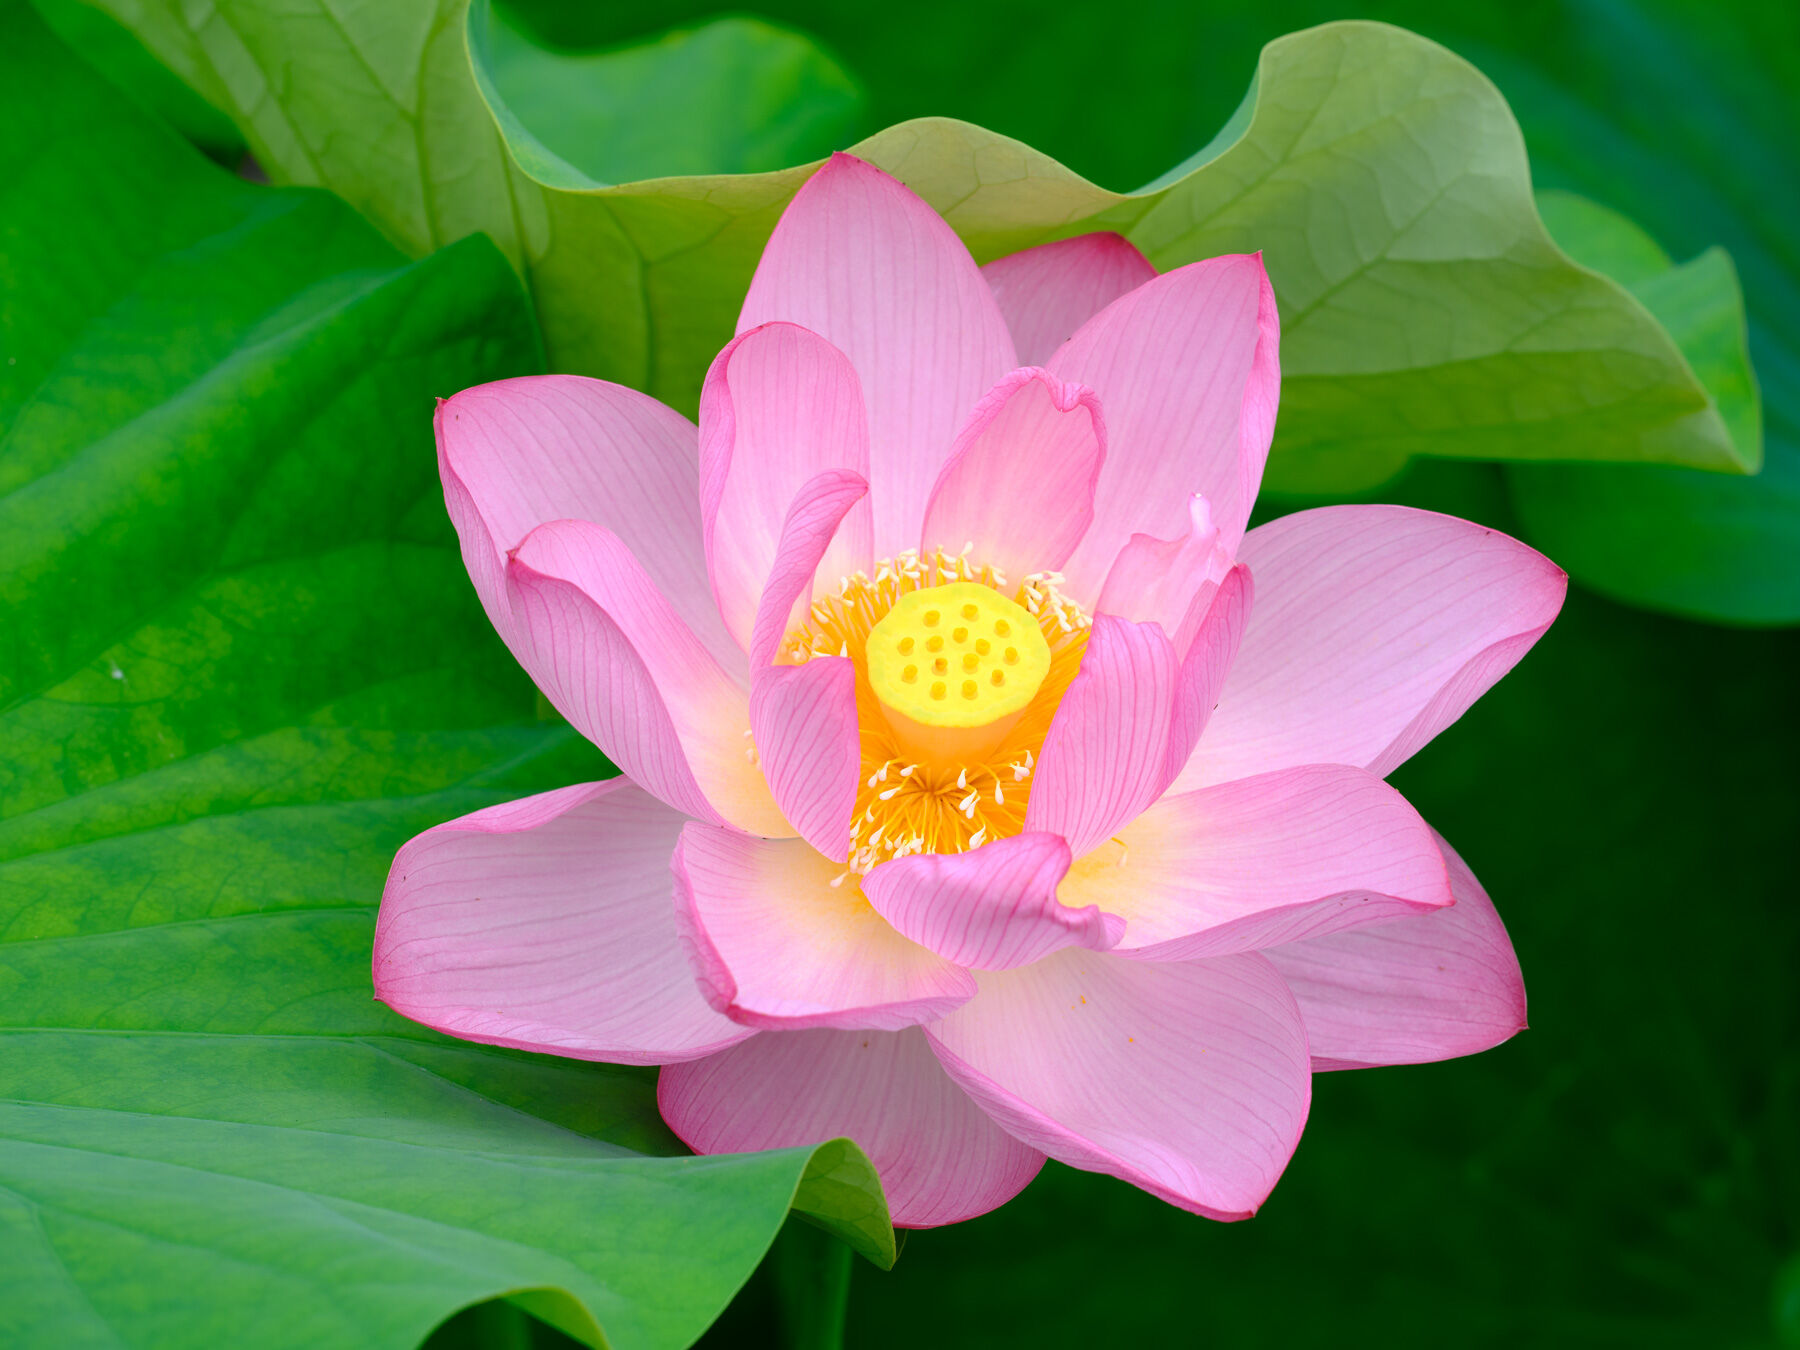 a pink lotus flower photographed by Andrew Shoemaker in Kyoto, Japan.